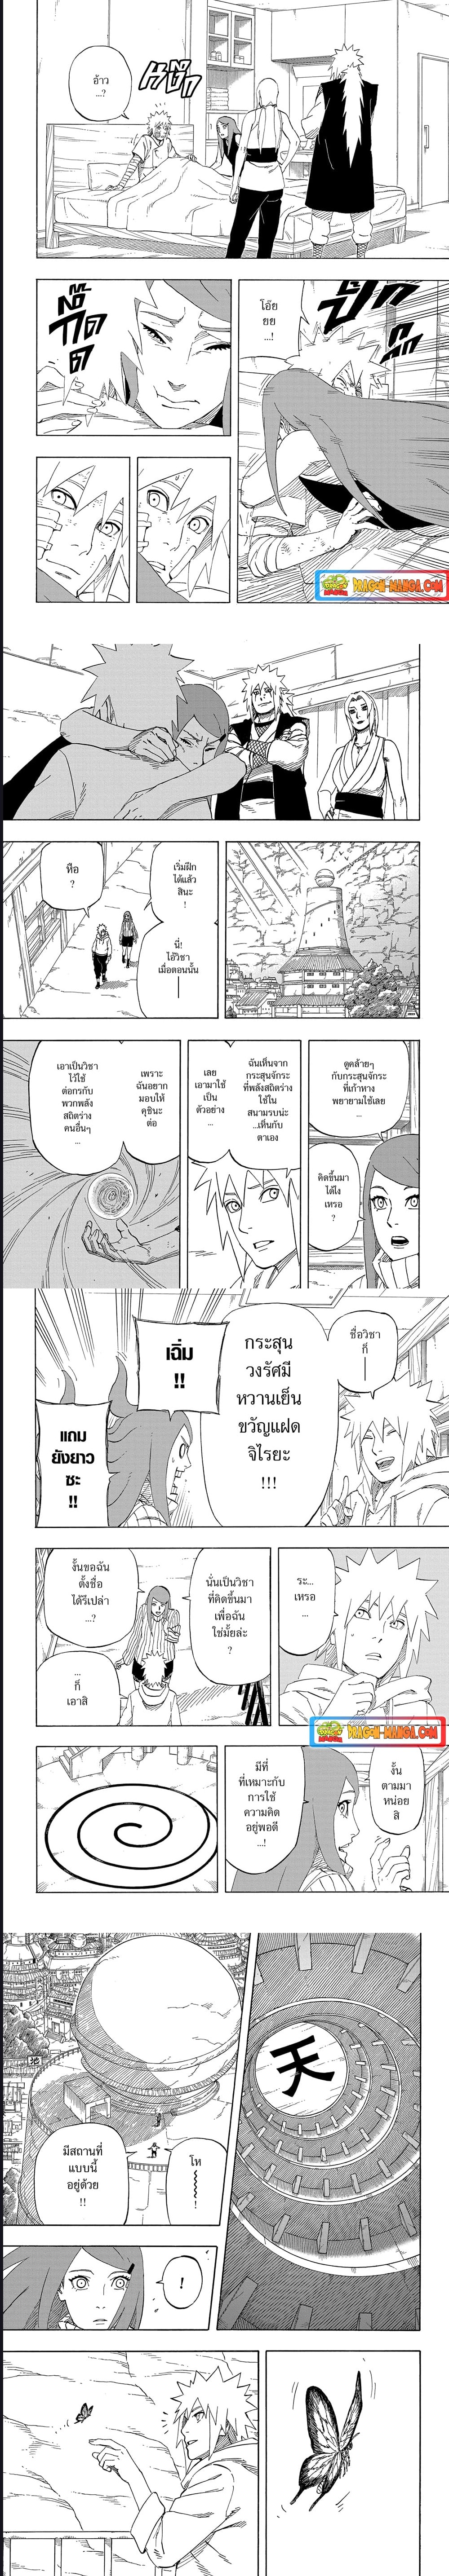 Naruto The Whorl within the Spiral ตอนที่ 1 (12)